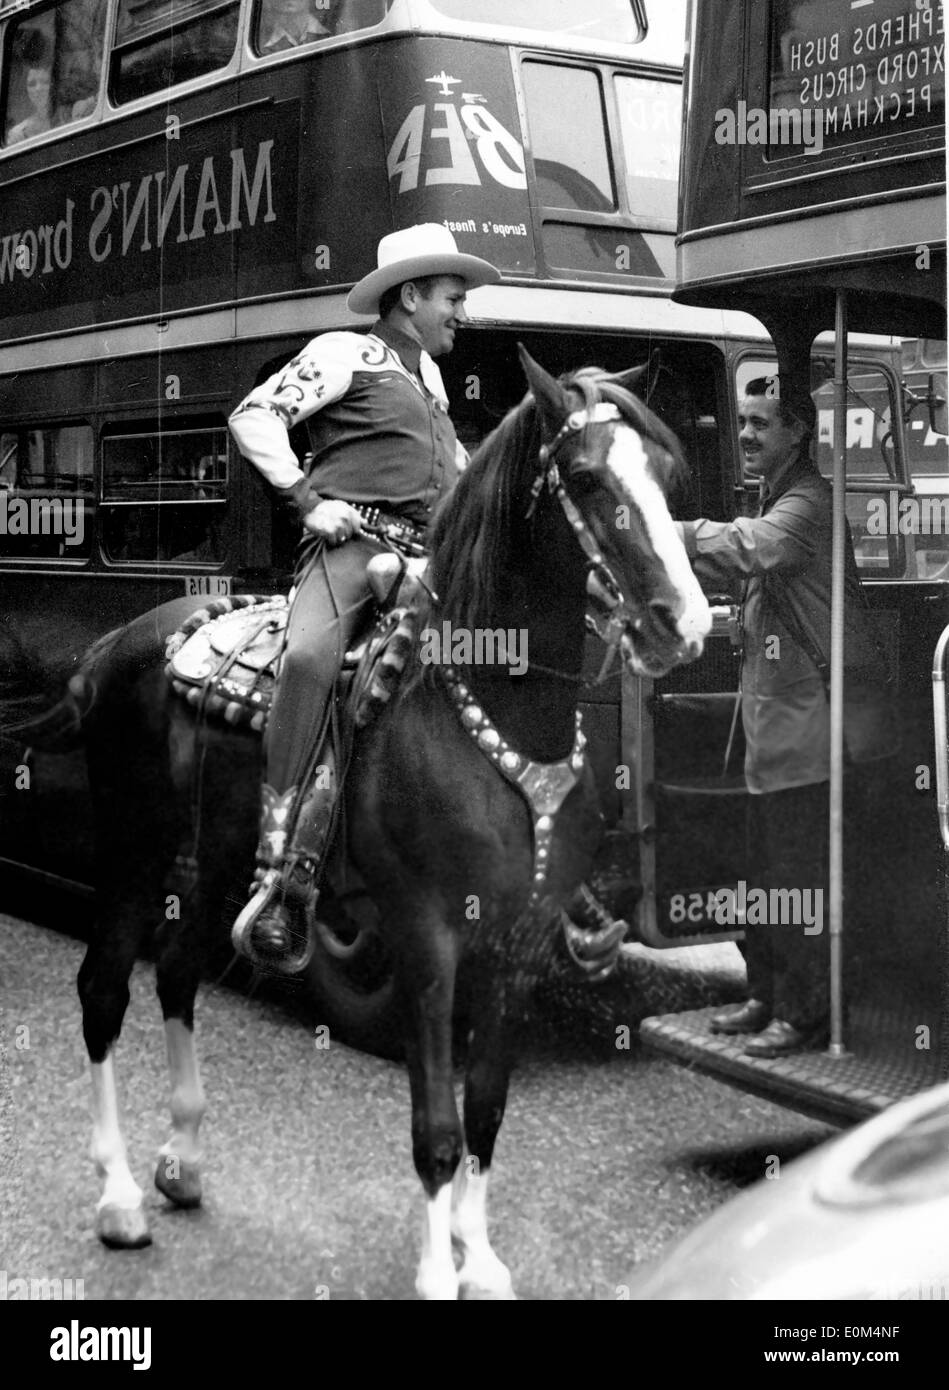 A bus conductor petting Gene Autry's horse on Oxford Street Stock Photo